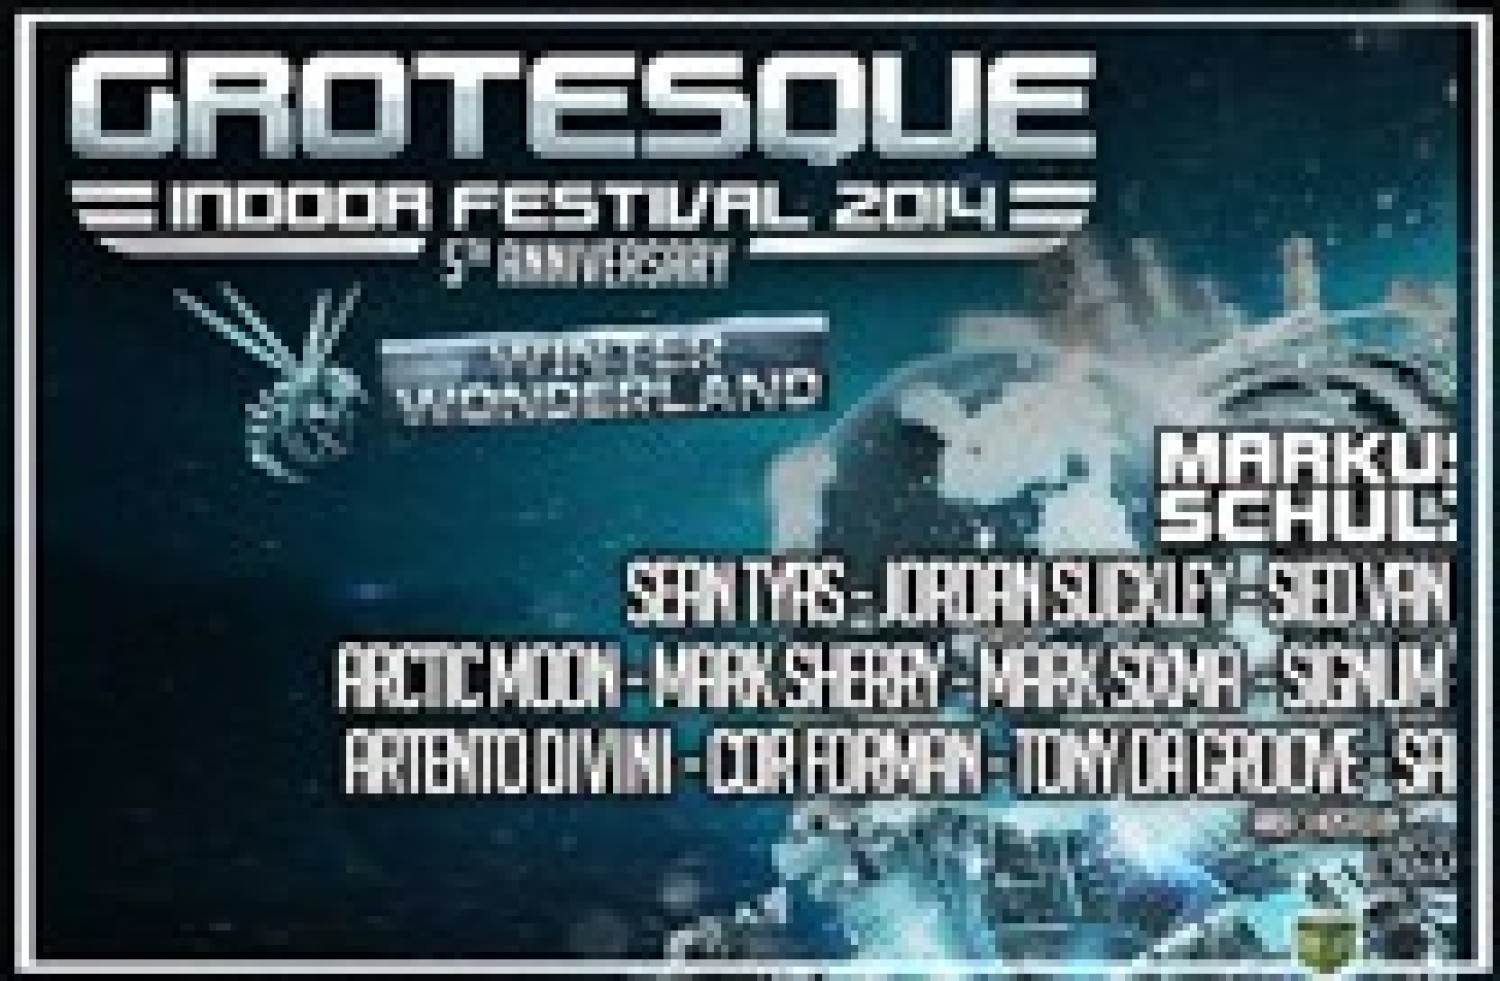 Party report: Grotesque Indoor Festival 2014, Rotterdam (08-11-2014)